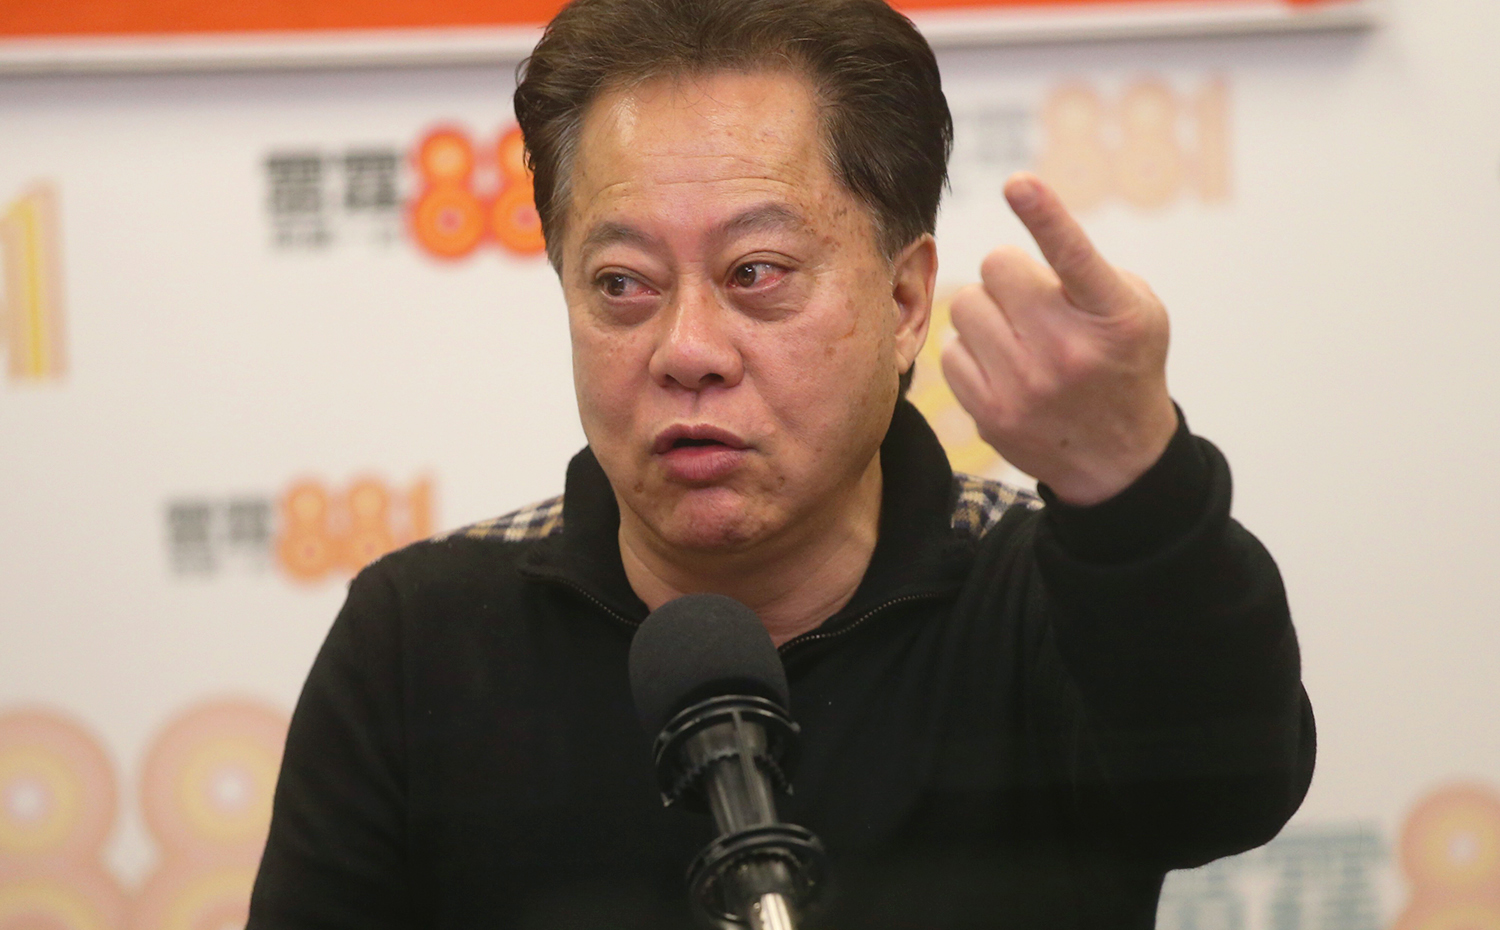 Chairman of Sheung Shui Rural Committee Hau Chi-keung attends Commercial Radio programme and talks about rural gentries forming own political party and NT small house privilege.SCMP/K. Y. Cheng